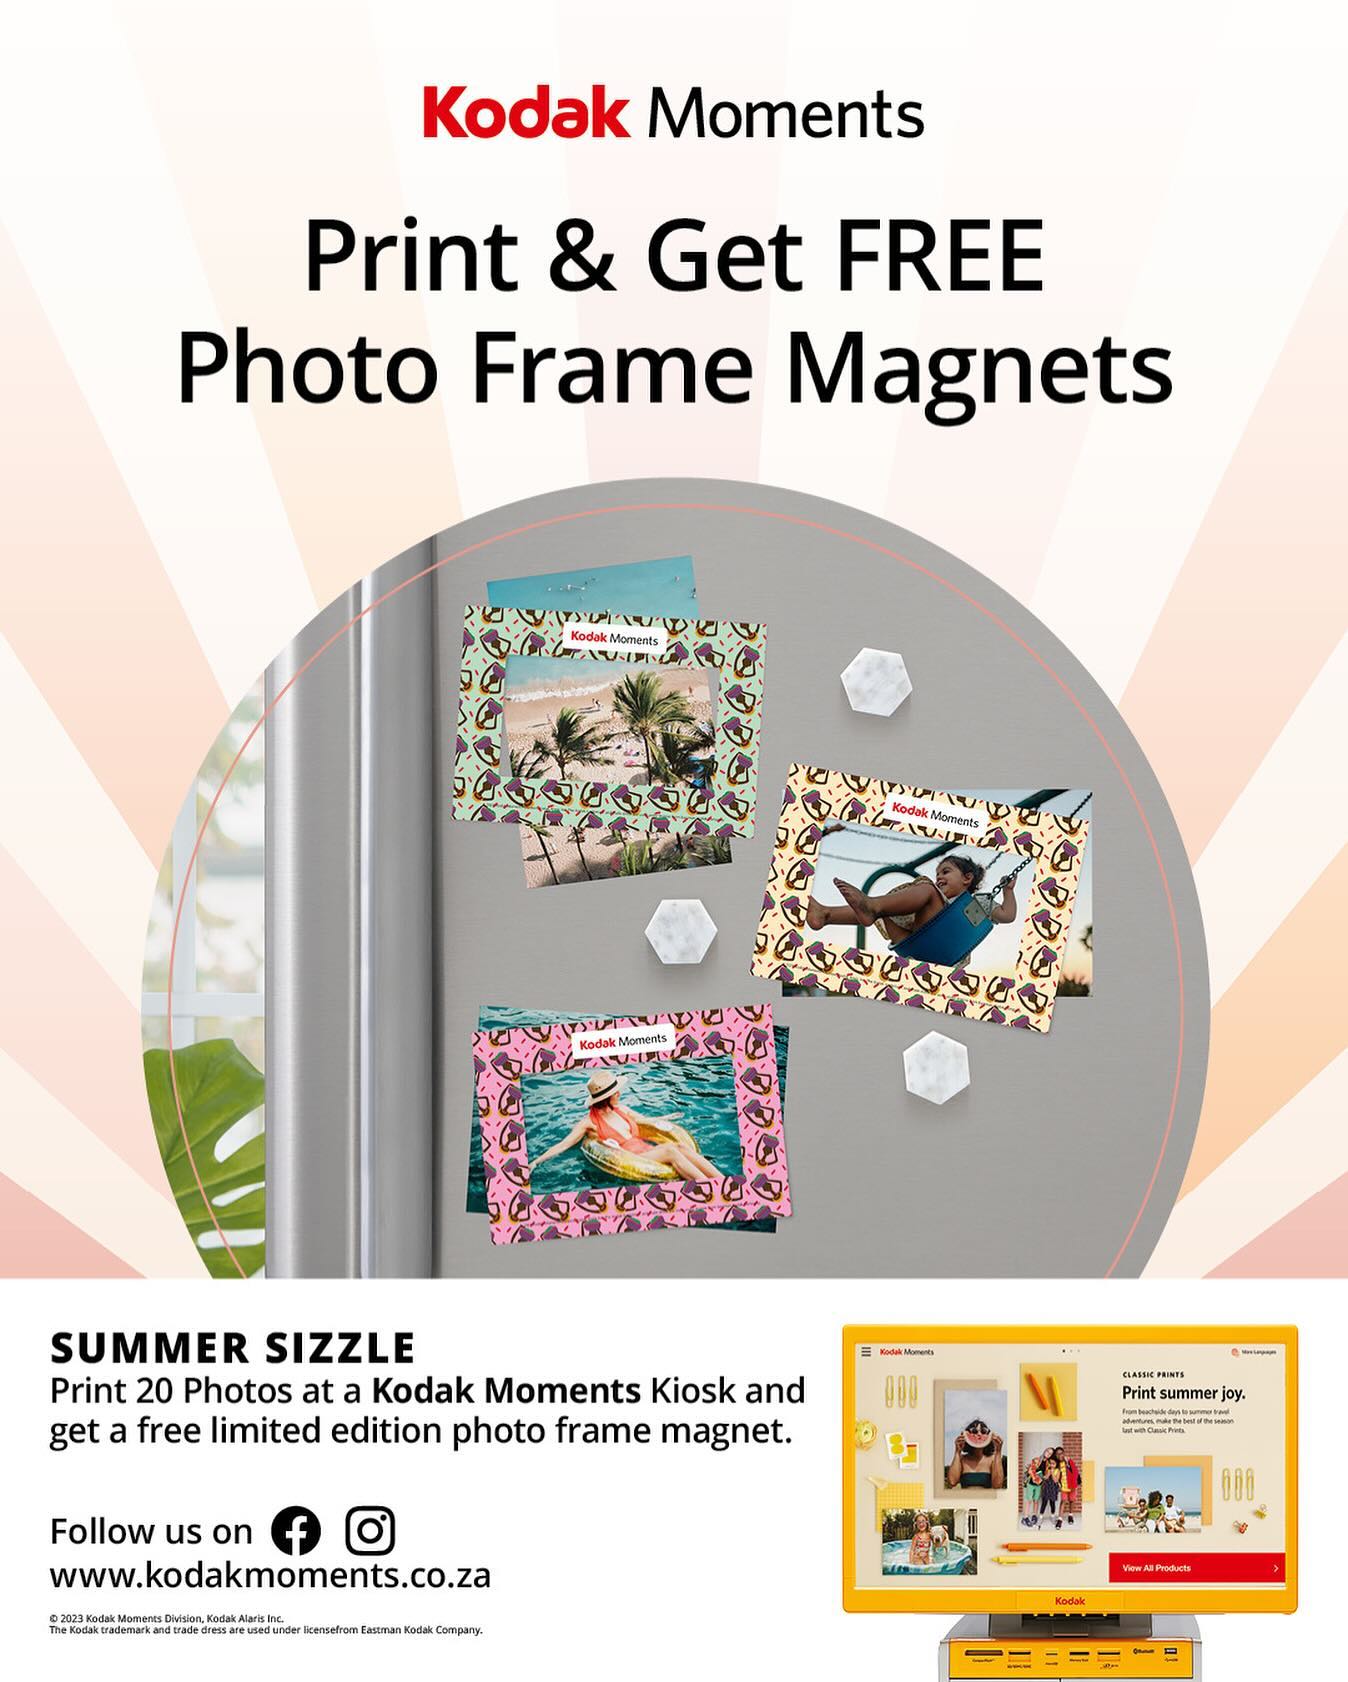 📸 Snap, Print & Frame! 🌟 Print 20 Photos at a Kodak Moments Kiosk and receive a FREE Photo Frame Magnet. Capture your summer adventures and relive them every day! 🖼️✨ #PrintAndGet #KodakMoments #MagnetMagic 📷🎁🖼️🌠🤳

How to enter: 
➡️ Print 20 prints at a Kodak Moments kiosk and receive your magnet directly at the store.

📍 Find your nearest KODAK MOMENTS kiosk easily on our website: https://www.kodakmoments.co.za/kiosk-locator

ℹ️ T&C’s apply. Ask staff for more details. 

We keep our fingers crossed for you! 🤞

#kodakmoments #kodakkiosk #kodakmomentsza
#prints #photography #gifts #personalizedgifts #printonkodak